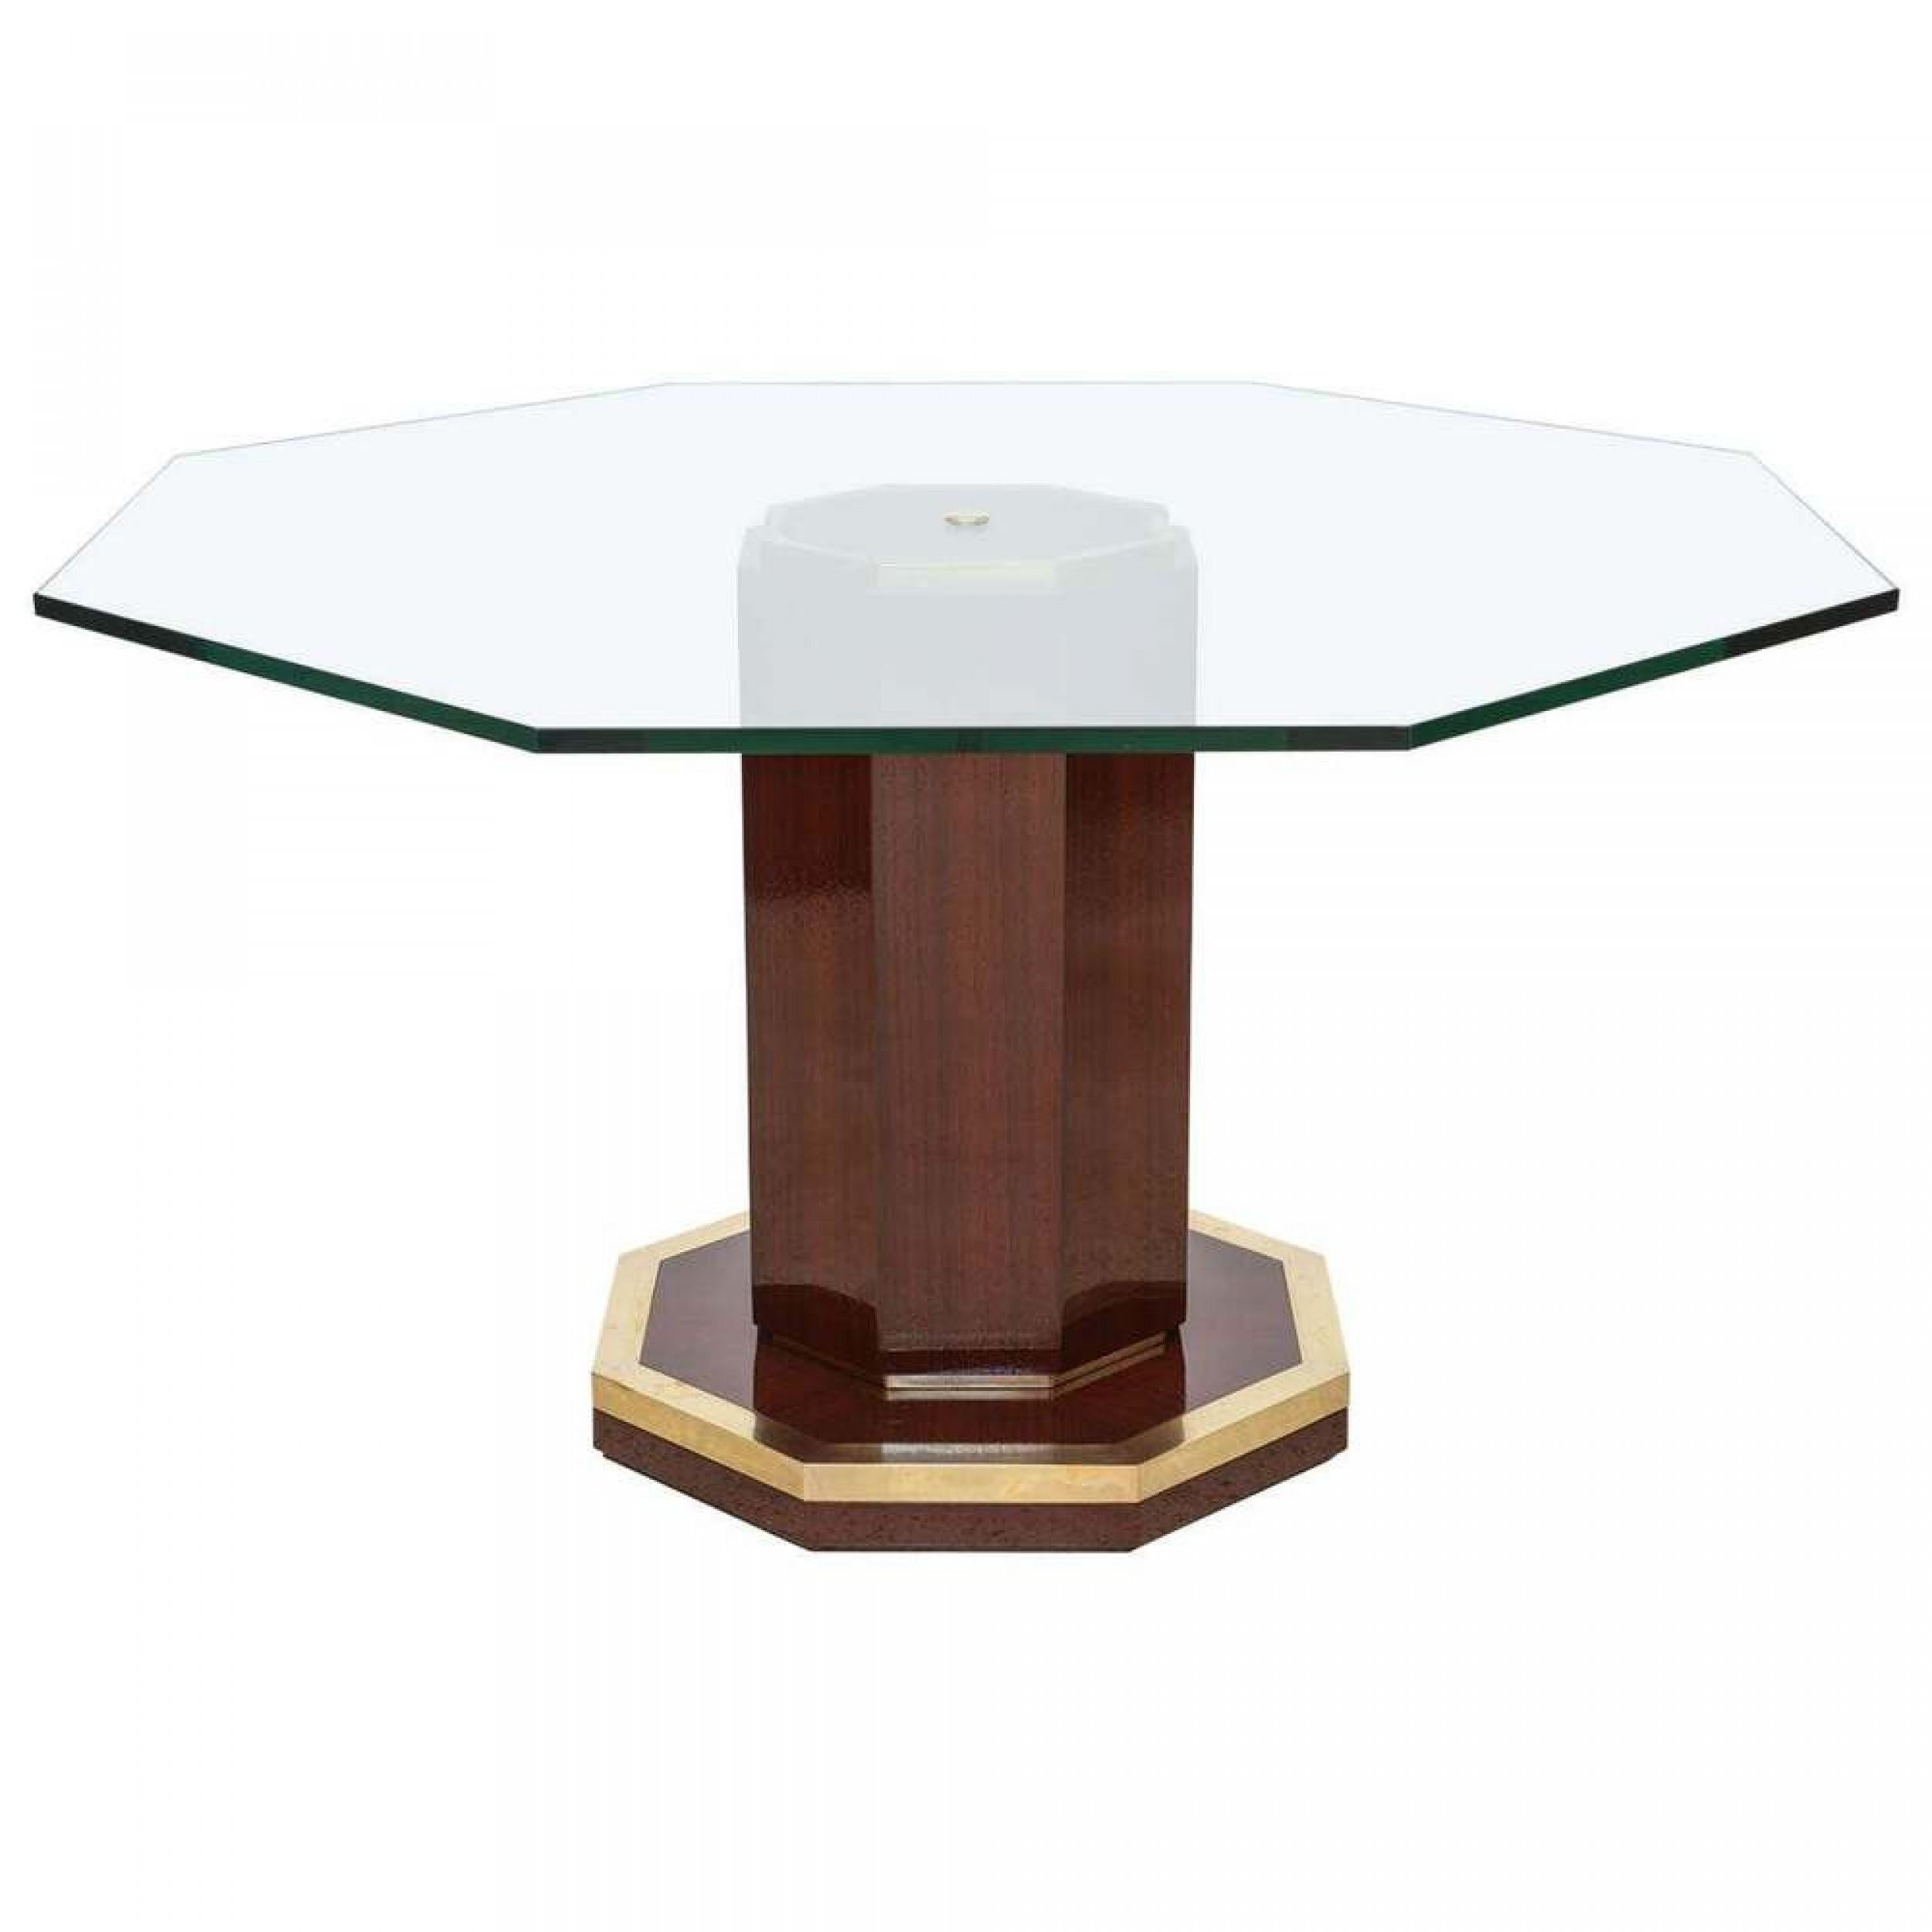 French Mid-Century Modern center table with an octagonal clear glass top resting on a pedestal base made of mahogany, ending in an octagonal brass-trimmed foot. (Attributed to JACQUES QUINET)